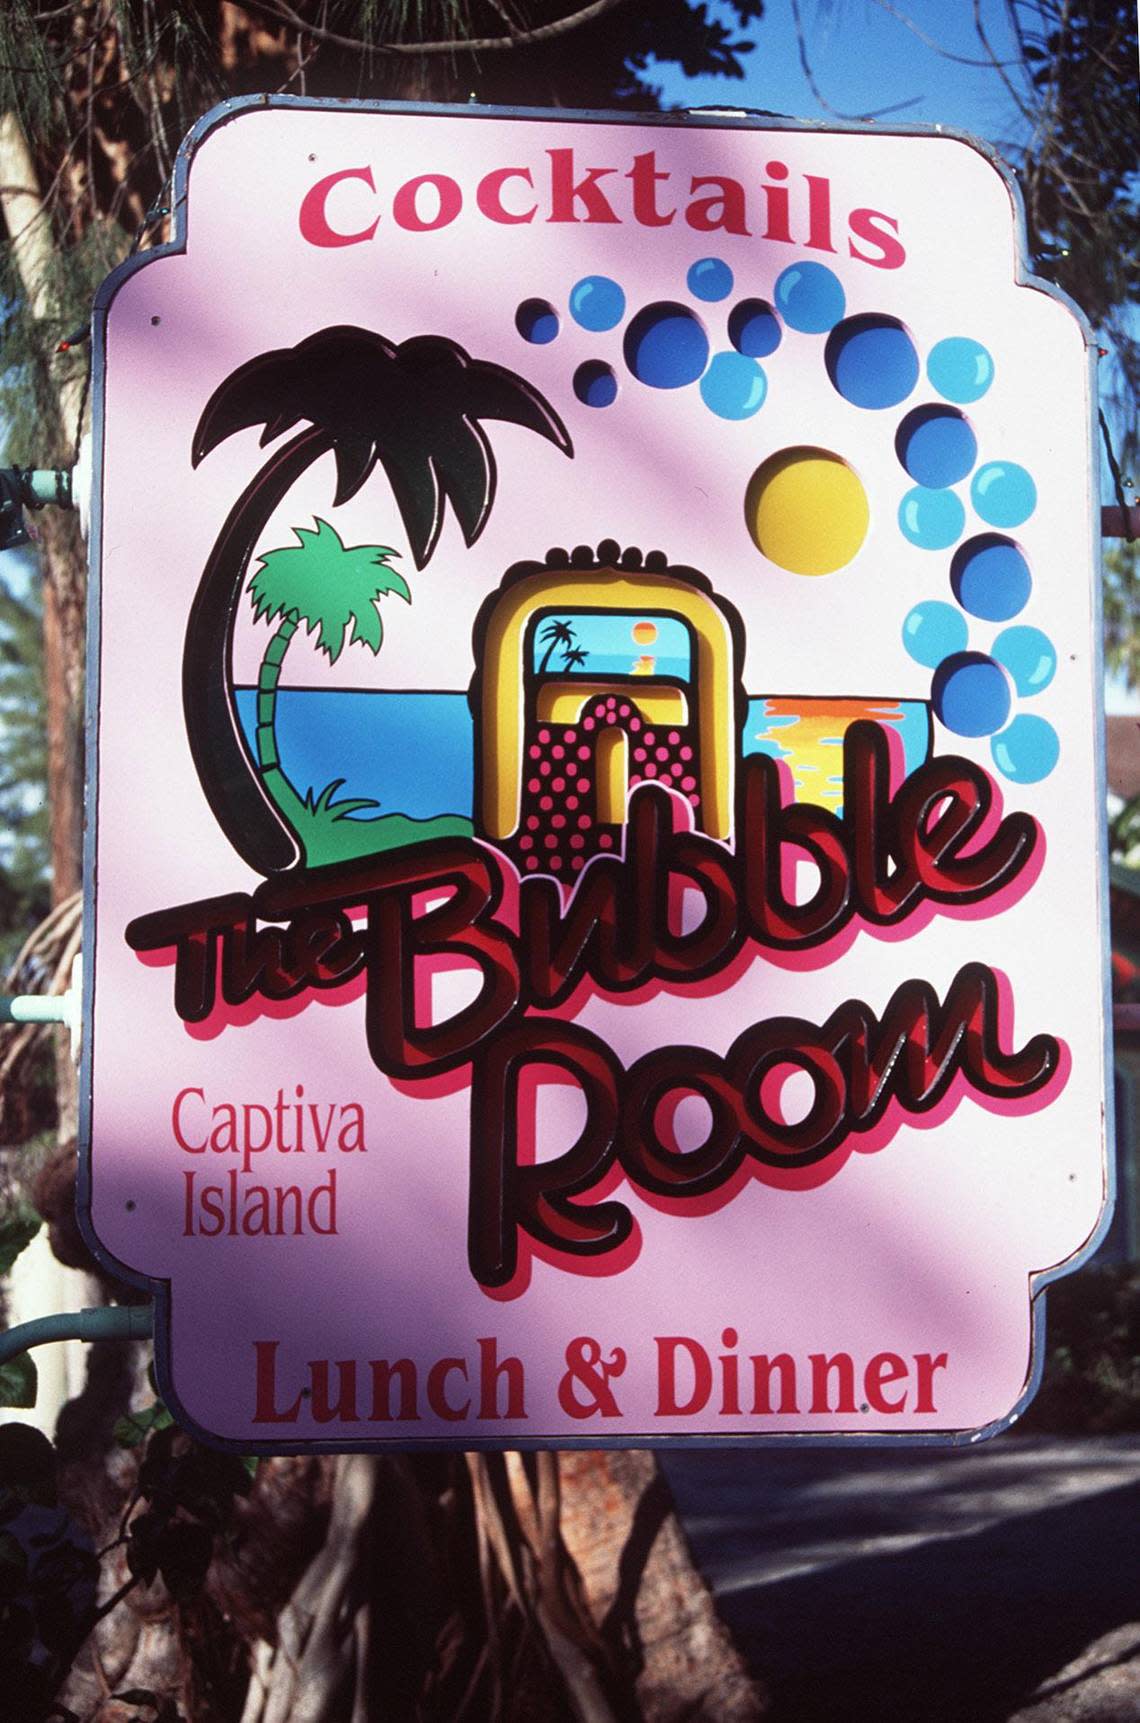 File photo of The Bubble Room’s sign in Captiva on 15001 Captiva Dr. in Florida from Oct. 24, 2000.